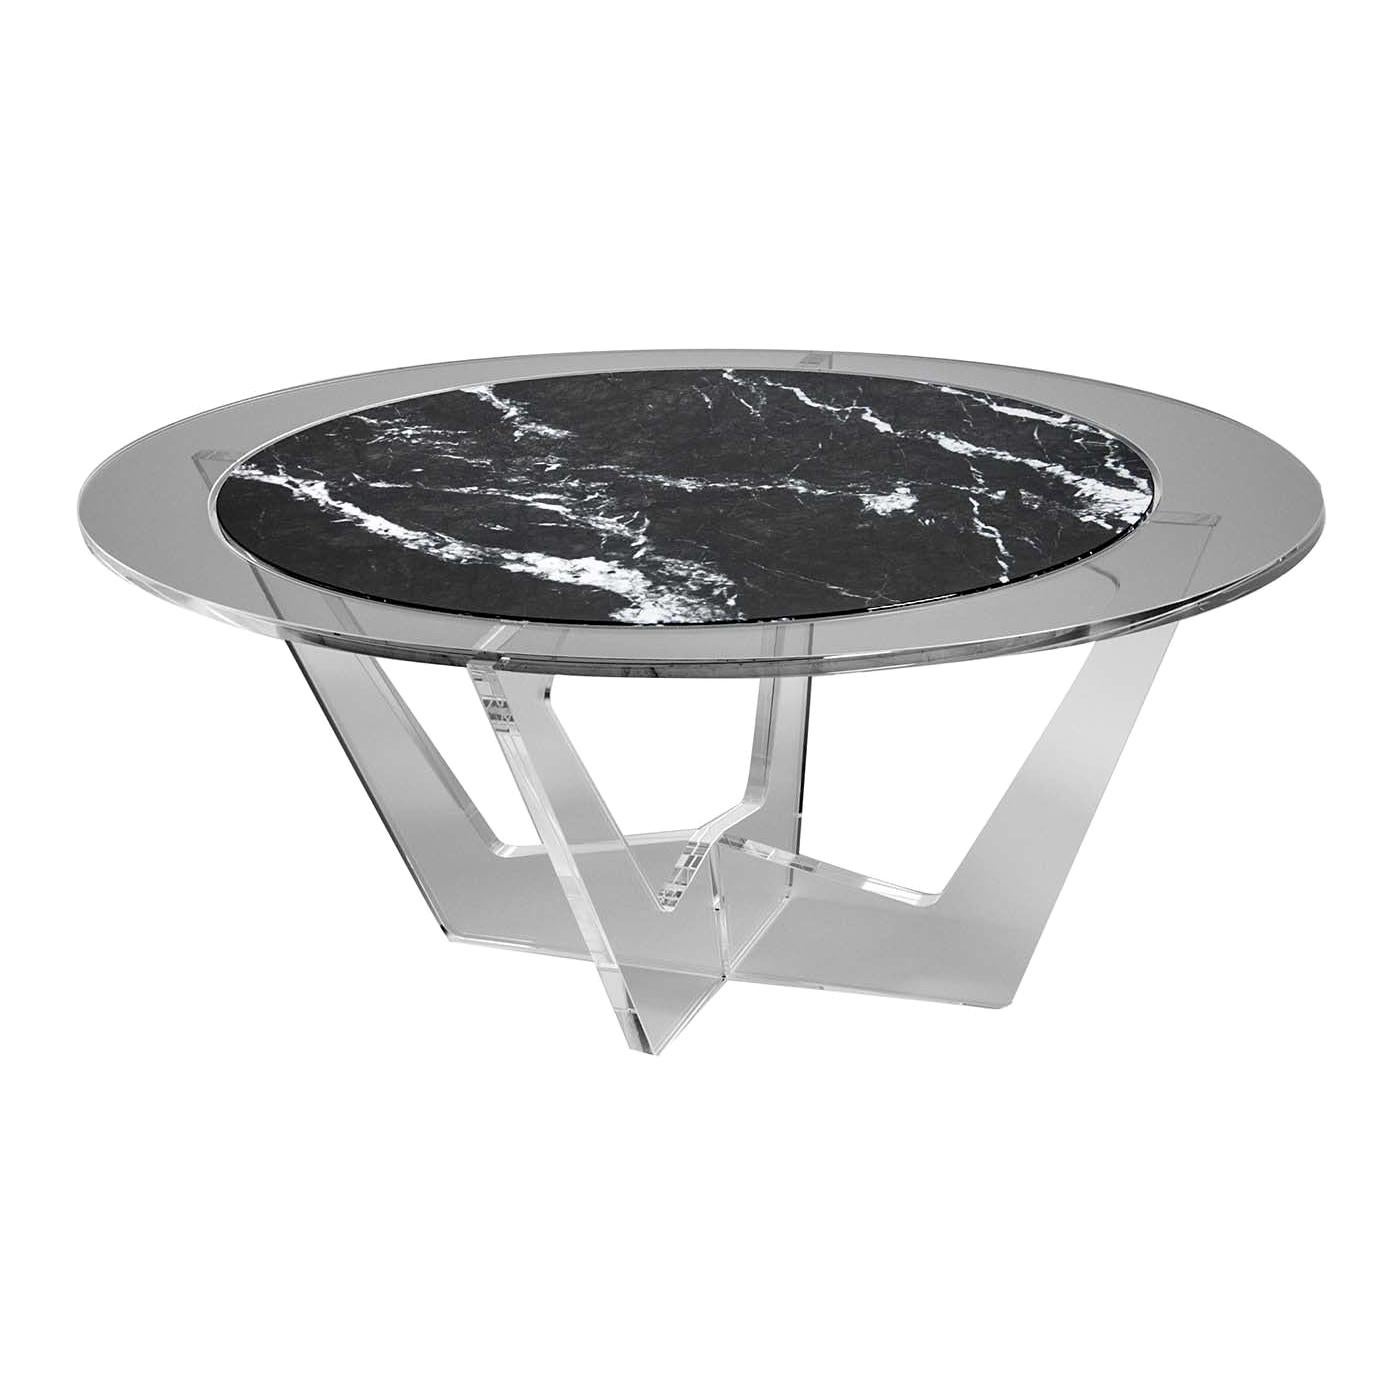 Hac Gray Oval Coffee Table with Carnico Marble-Top by Madea Milano